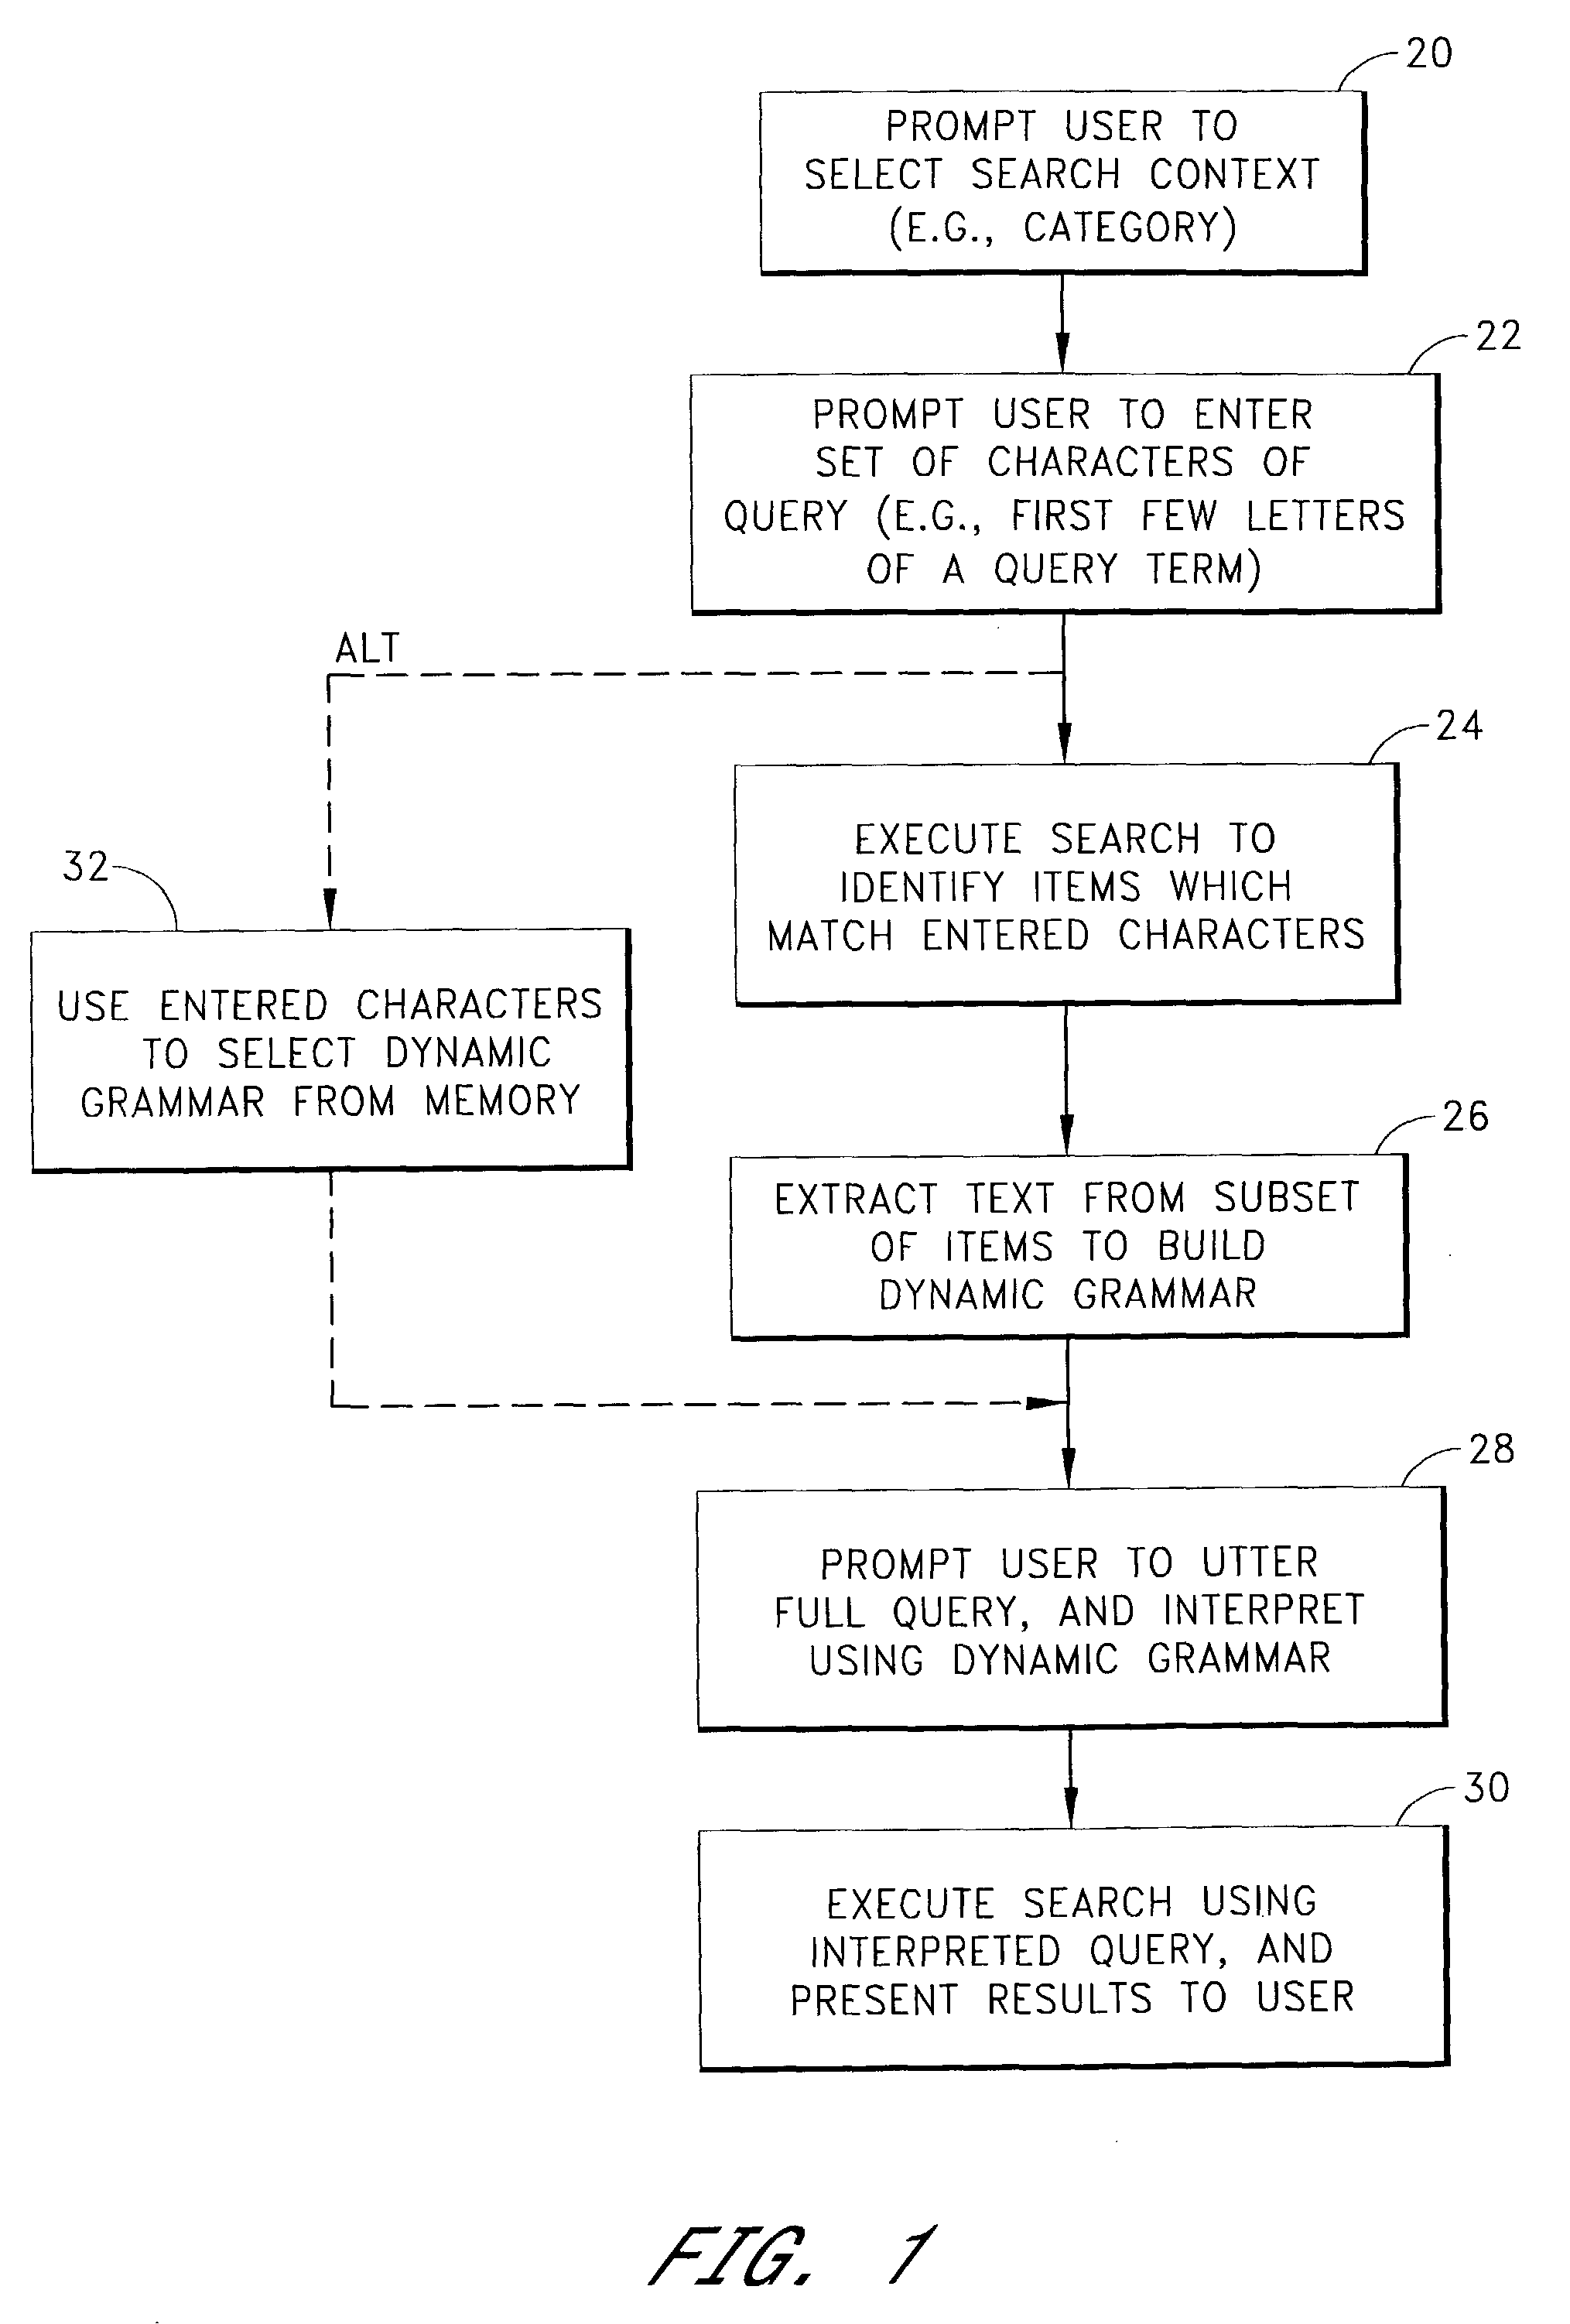 Generation and selection of voice recognition grammars for conducting database searches